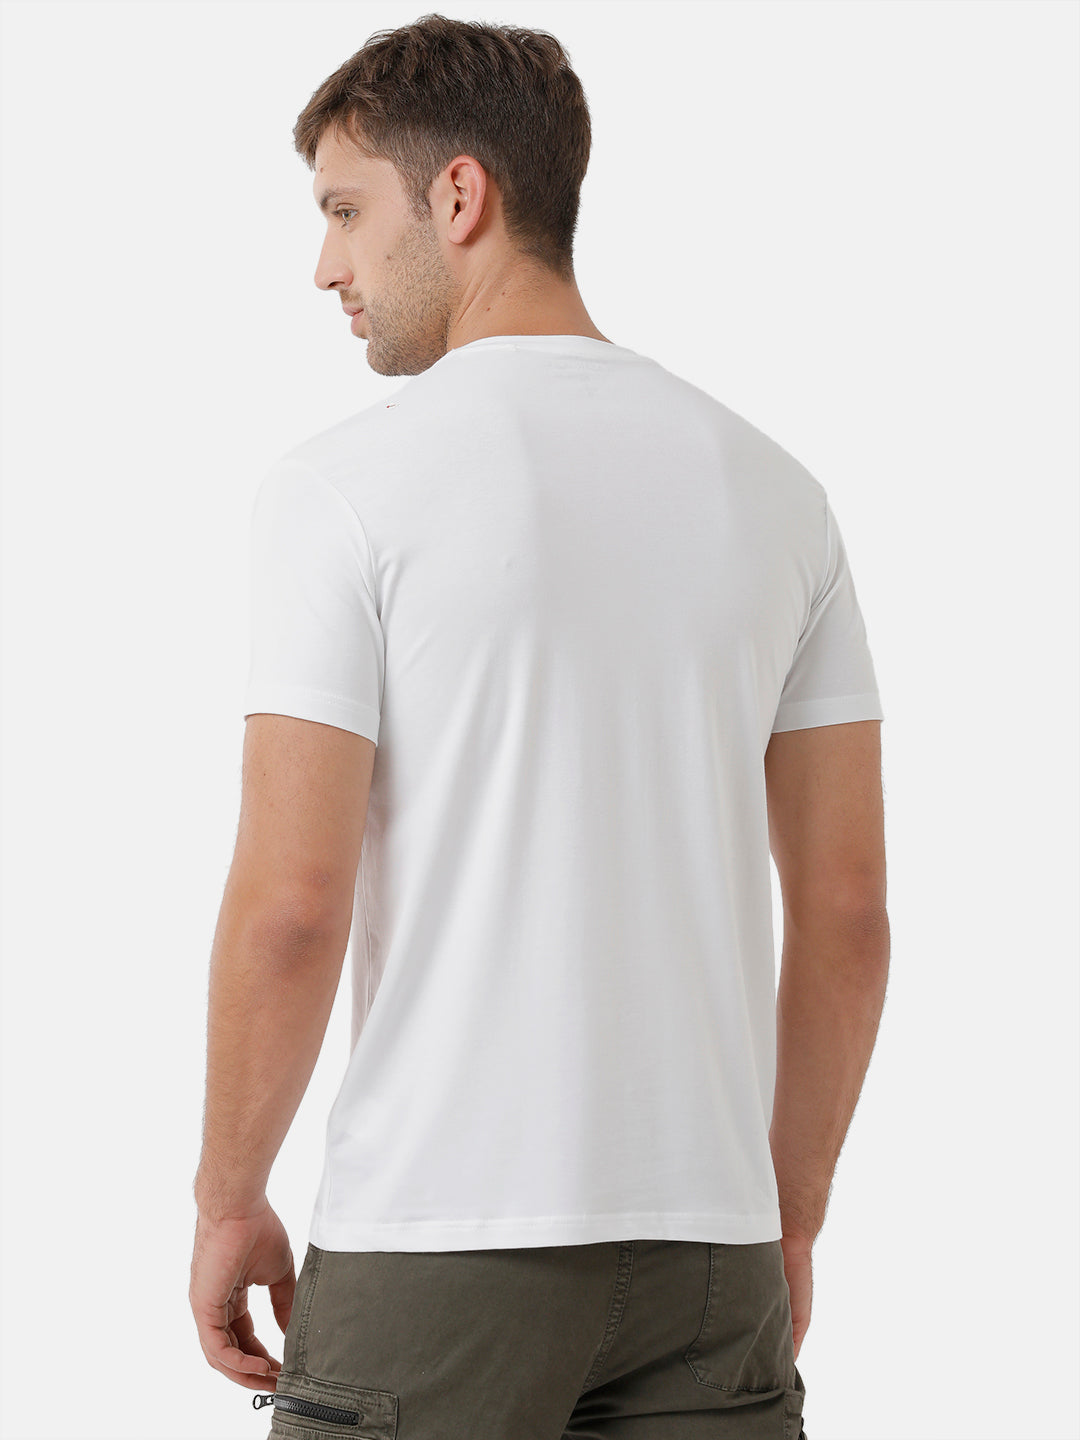 Classic Polo Mens Cotton Printed Half Sleeve Slim Fit Round Neck White Color T-Shirt | Baleno 490